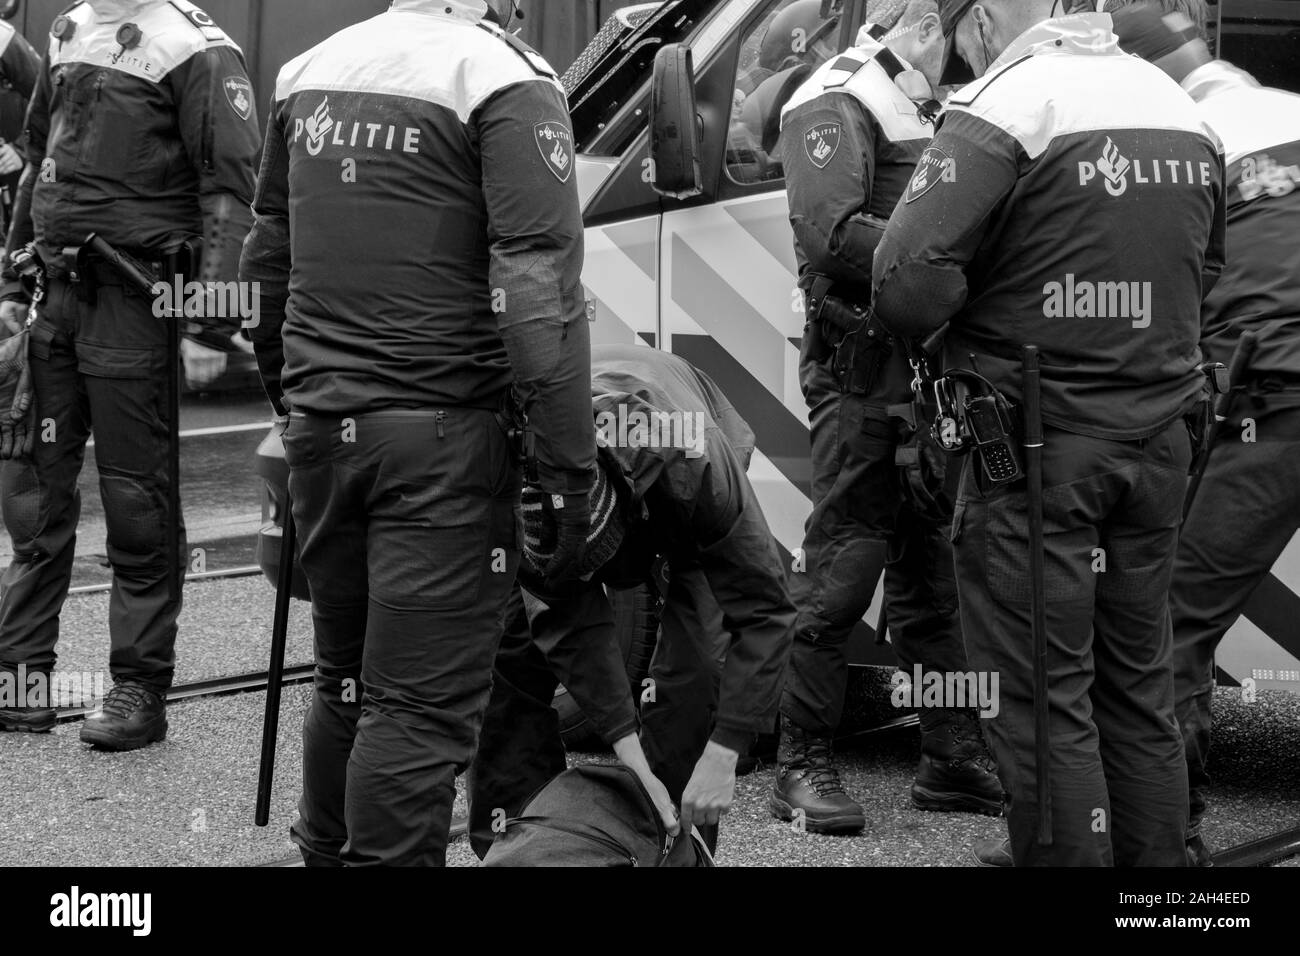 Police Arresting Protesters At The Rebellion Extinction Demonstration Amsterdam The Netherlands 2019 In Black And White Stock Photo